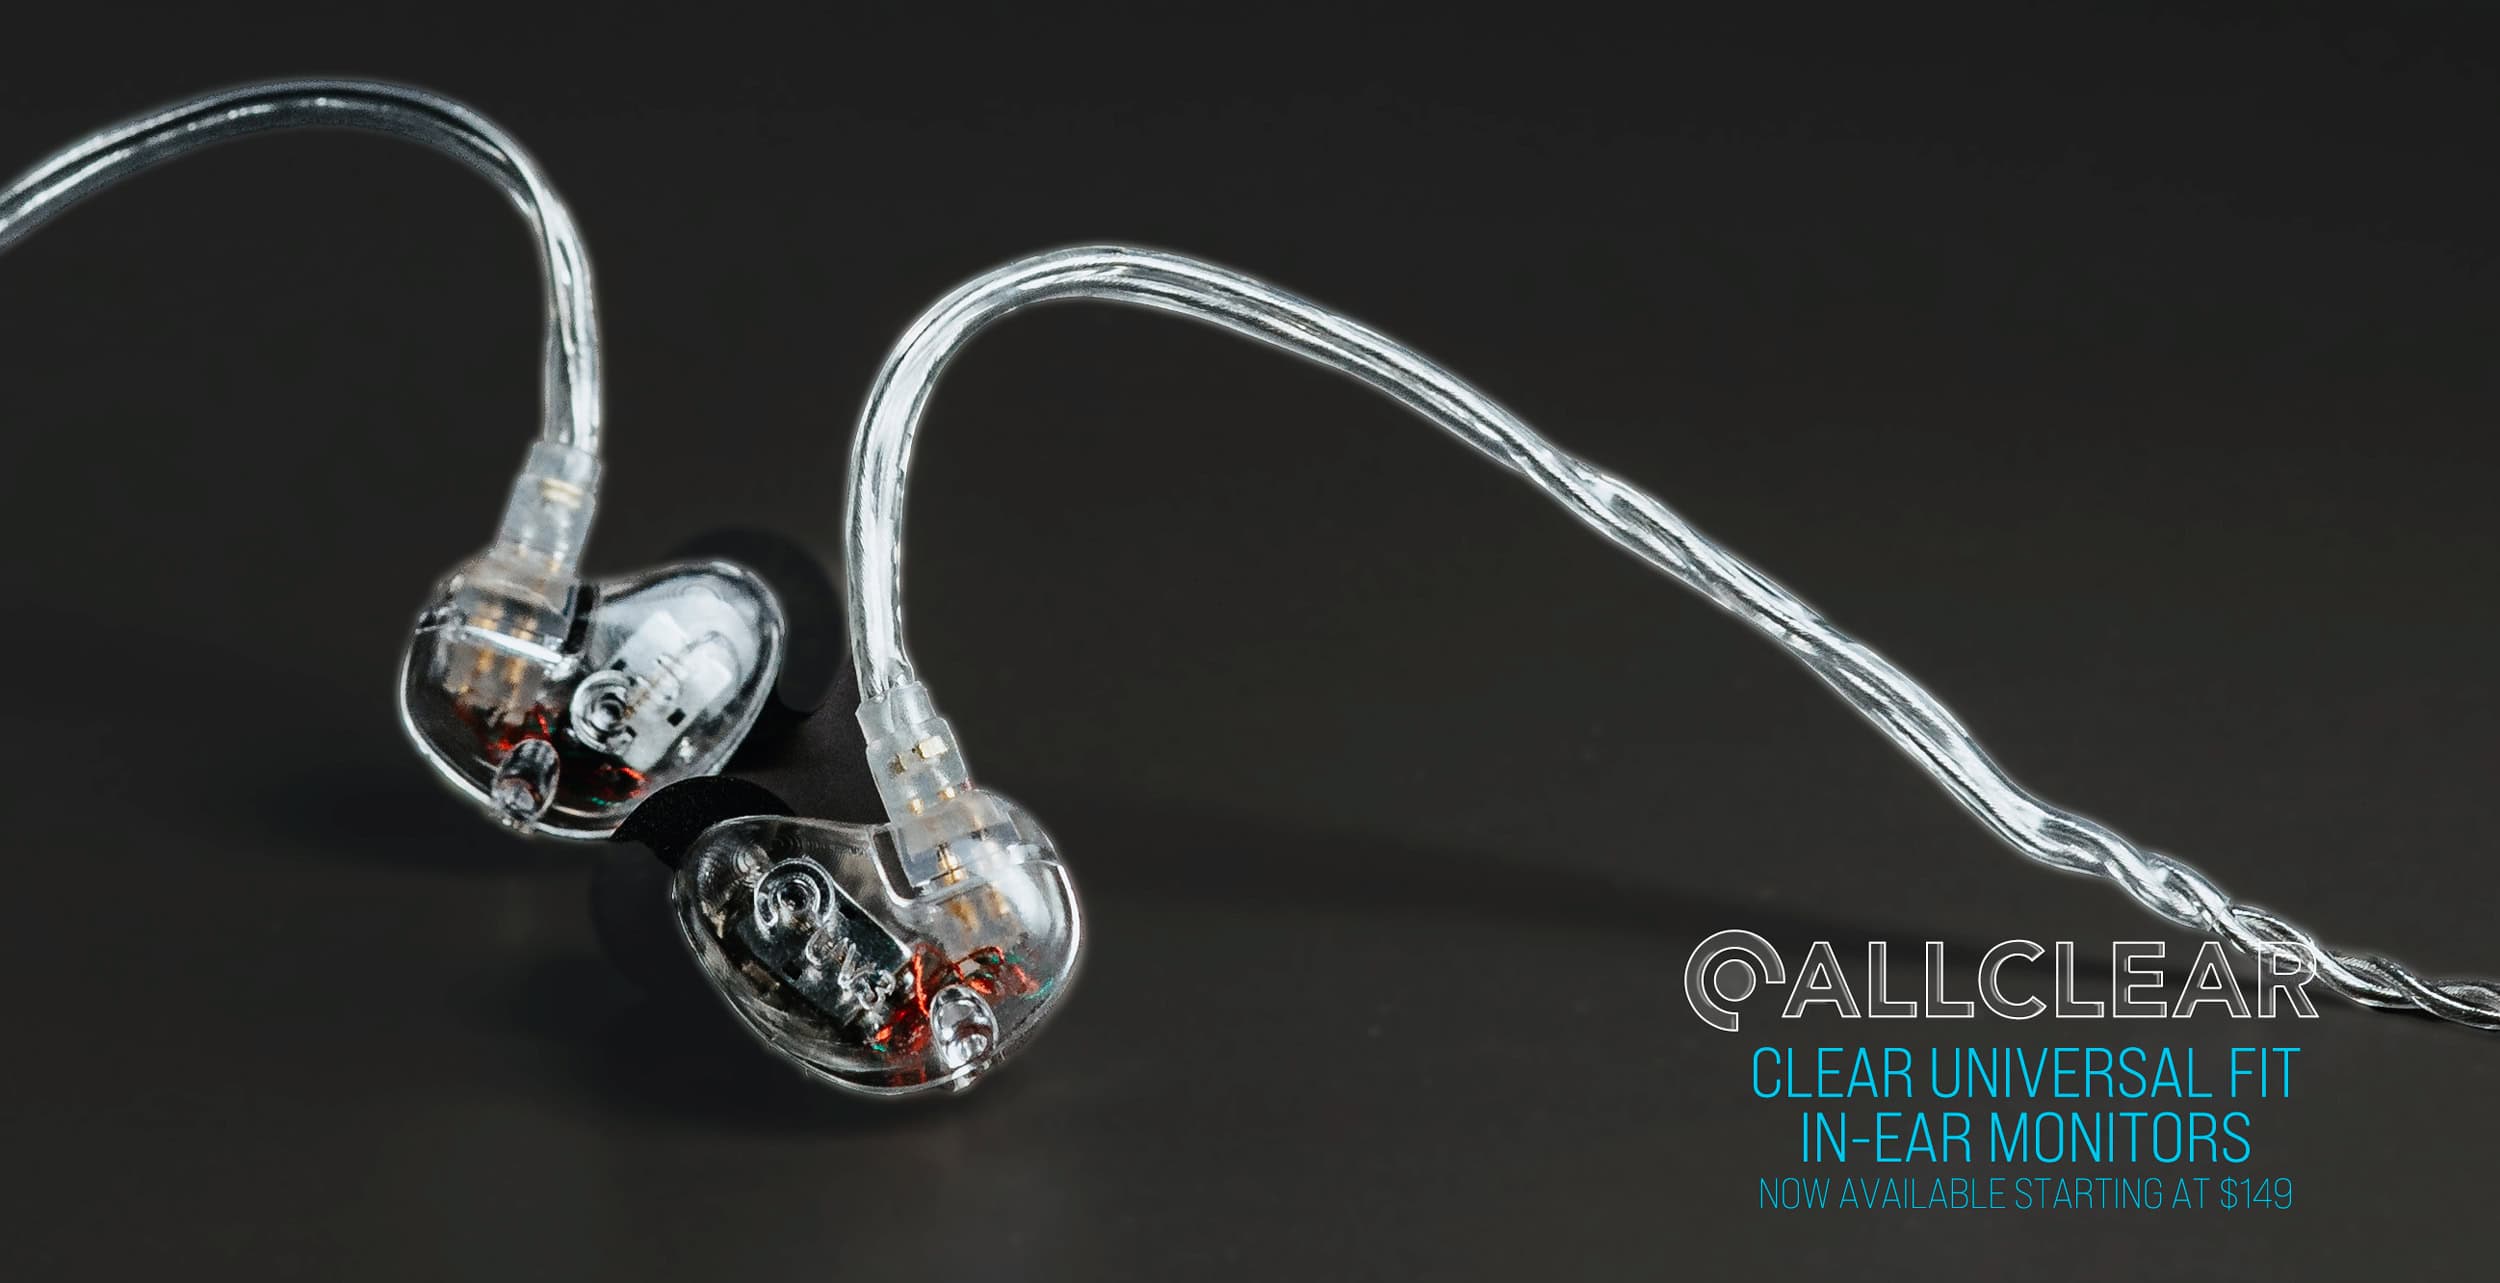 Universal fit in ear monitors - made in the usa - compare to westone and shure Desktop Version